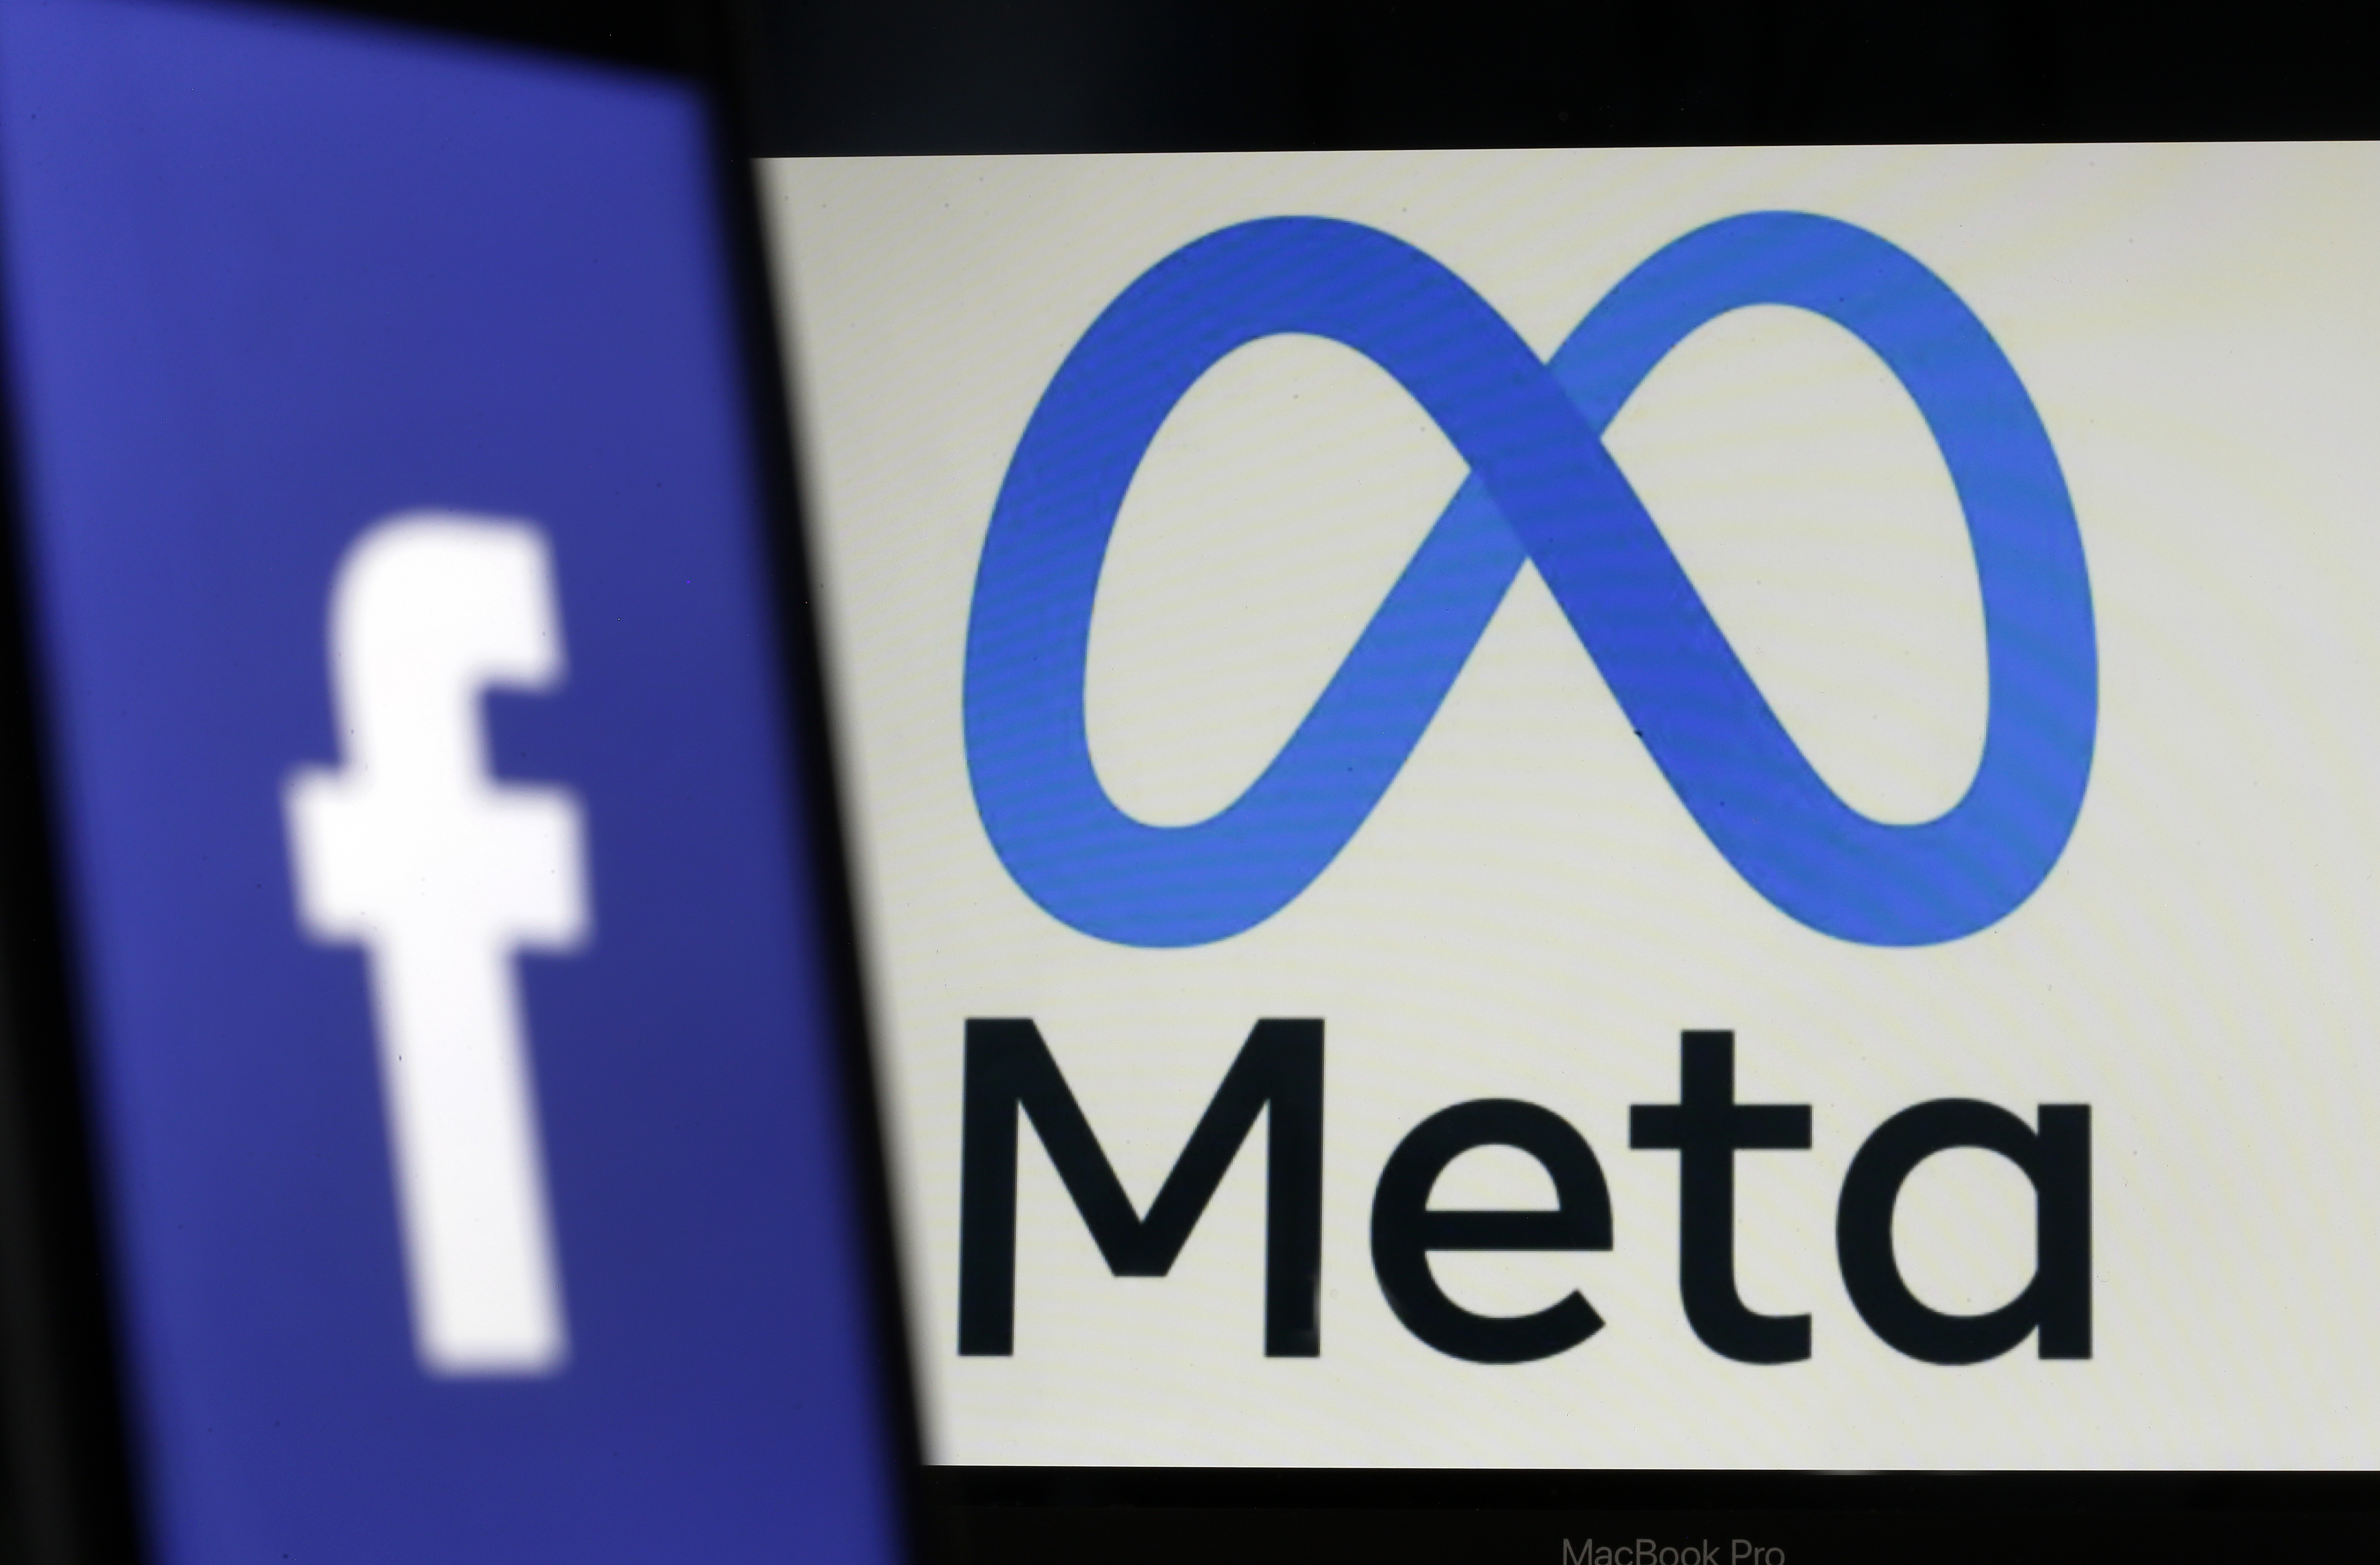 Meta wants you to create more Instagram and Facebook accounts and hop between them easily